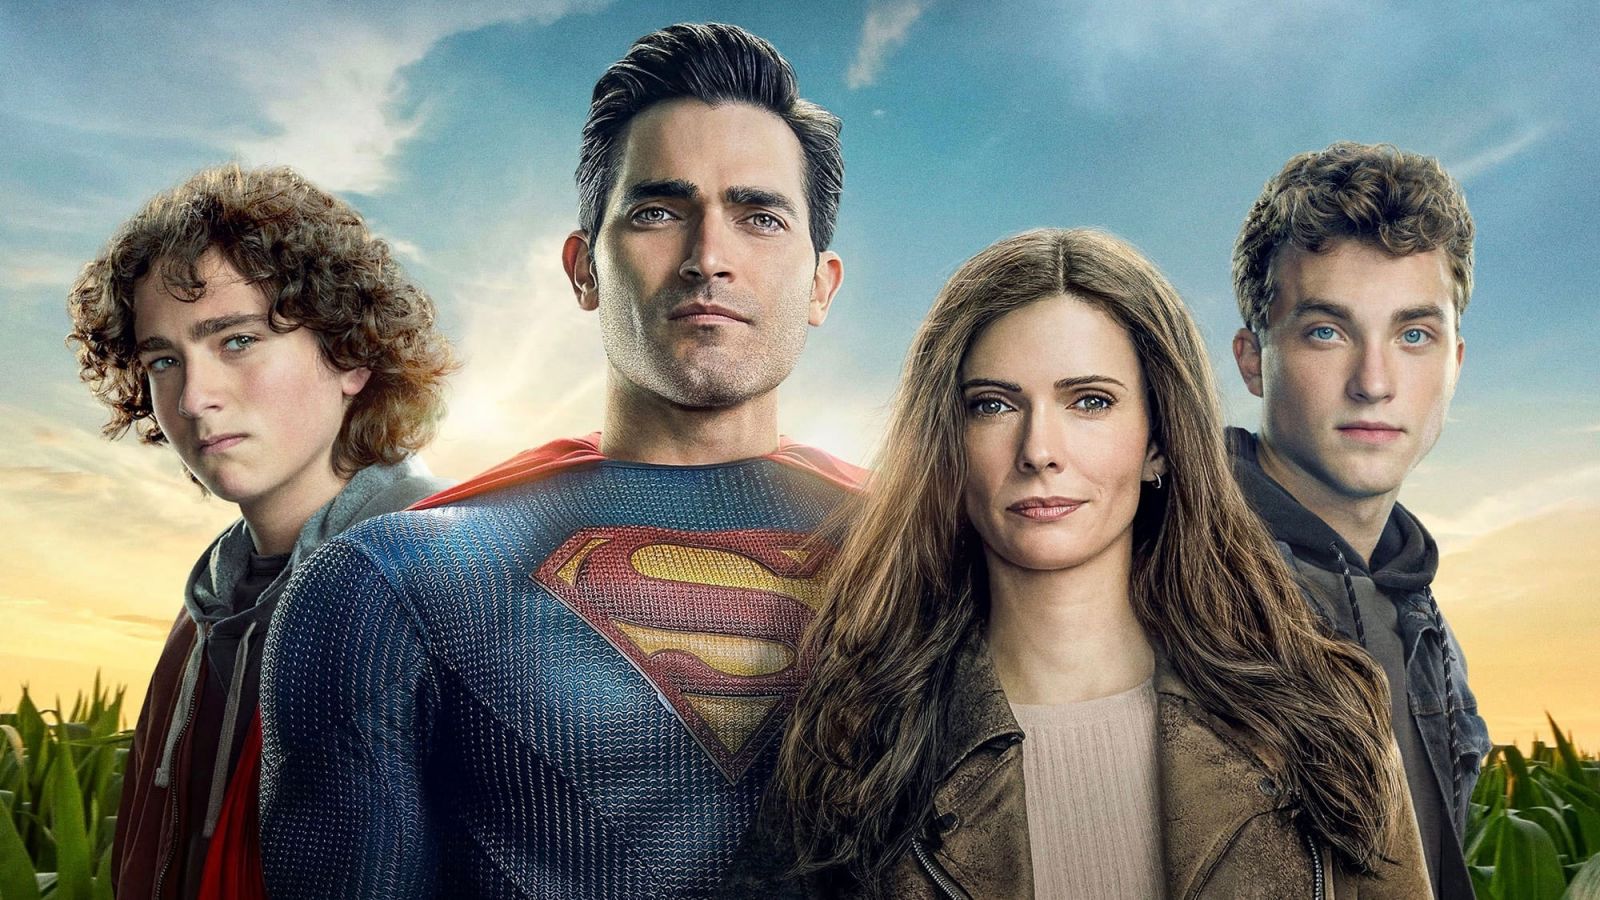 Superman and Lois 2021 Full Movies Full HD, Superman and Lois 2021 Full Movies Full HD Free Online, Superman and Lois 2021 Full Movies Free Watch Online, Watch Online Free Superman and Lois 2021 Full Movies HD, Superman and Lois 2021 Session 1 Full Episode Free Watch Online, Watch Streaming Online Superman and Lois 2021 Session 1 Full Episode, Superman and Lois 2021 Session 1 Full Episode English Language, Streaming Full HD Superman and Lois 2021 Full Episode Session 1, Watch Session 1 Superman and Lois 2021 Full Episode English Version, Session 2 What Lies Beneath, Session 2 The Ties That Bind, The Thing In The Mines Session 2, Supper man moives, Superman Lois Session 2 The Inverse Method, Superman Lois Girl You Will Be A Woman Soon, Superman Lois Session 2 Tried and True, Superman Lois Anti-Hero, Superman Lois Into Oblivion, Superman 30 Days and 30 Nights